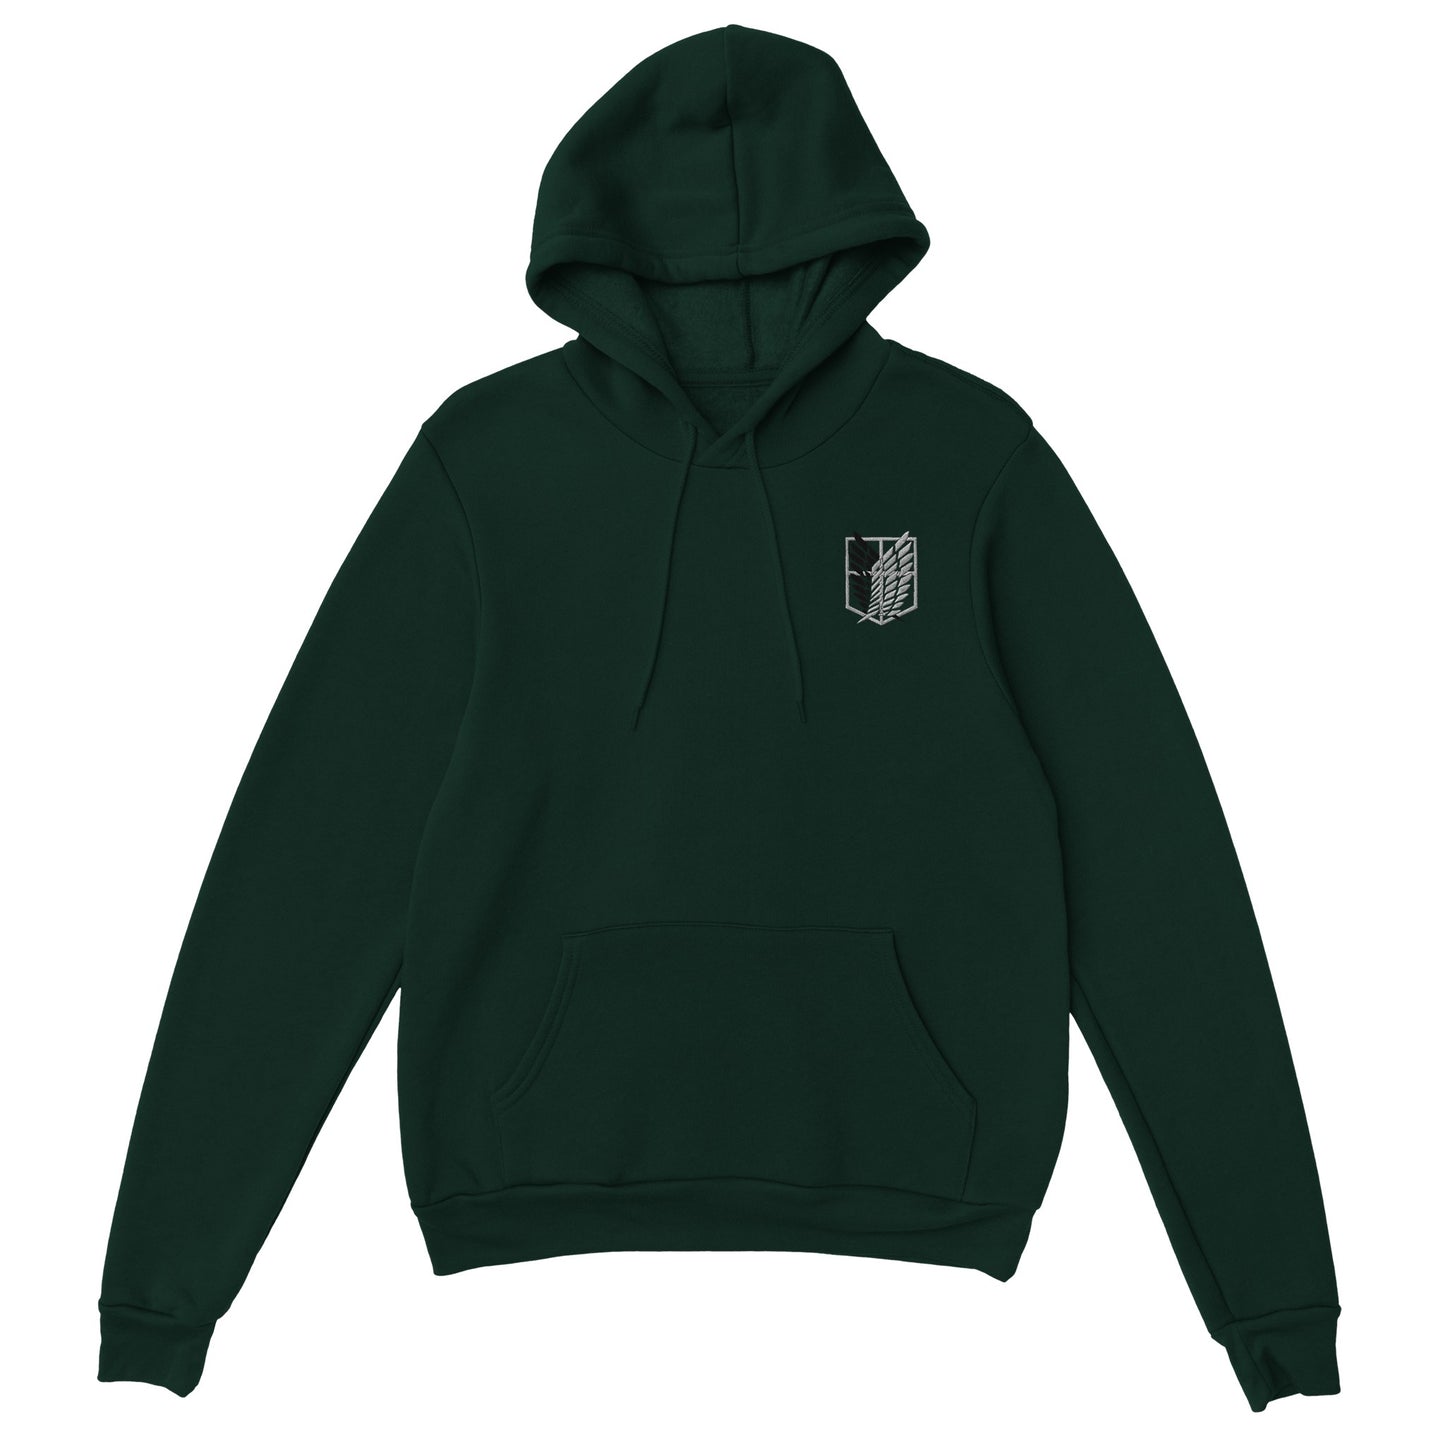 Attack on Titan - Wings of Freedom Embroidered Hoodie